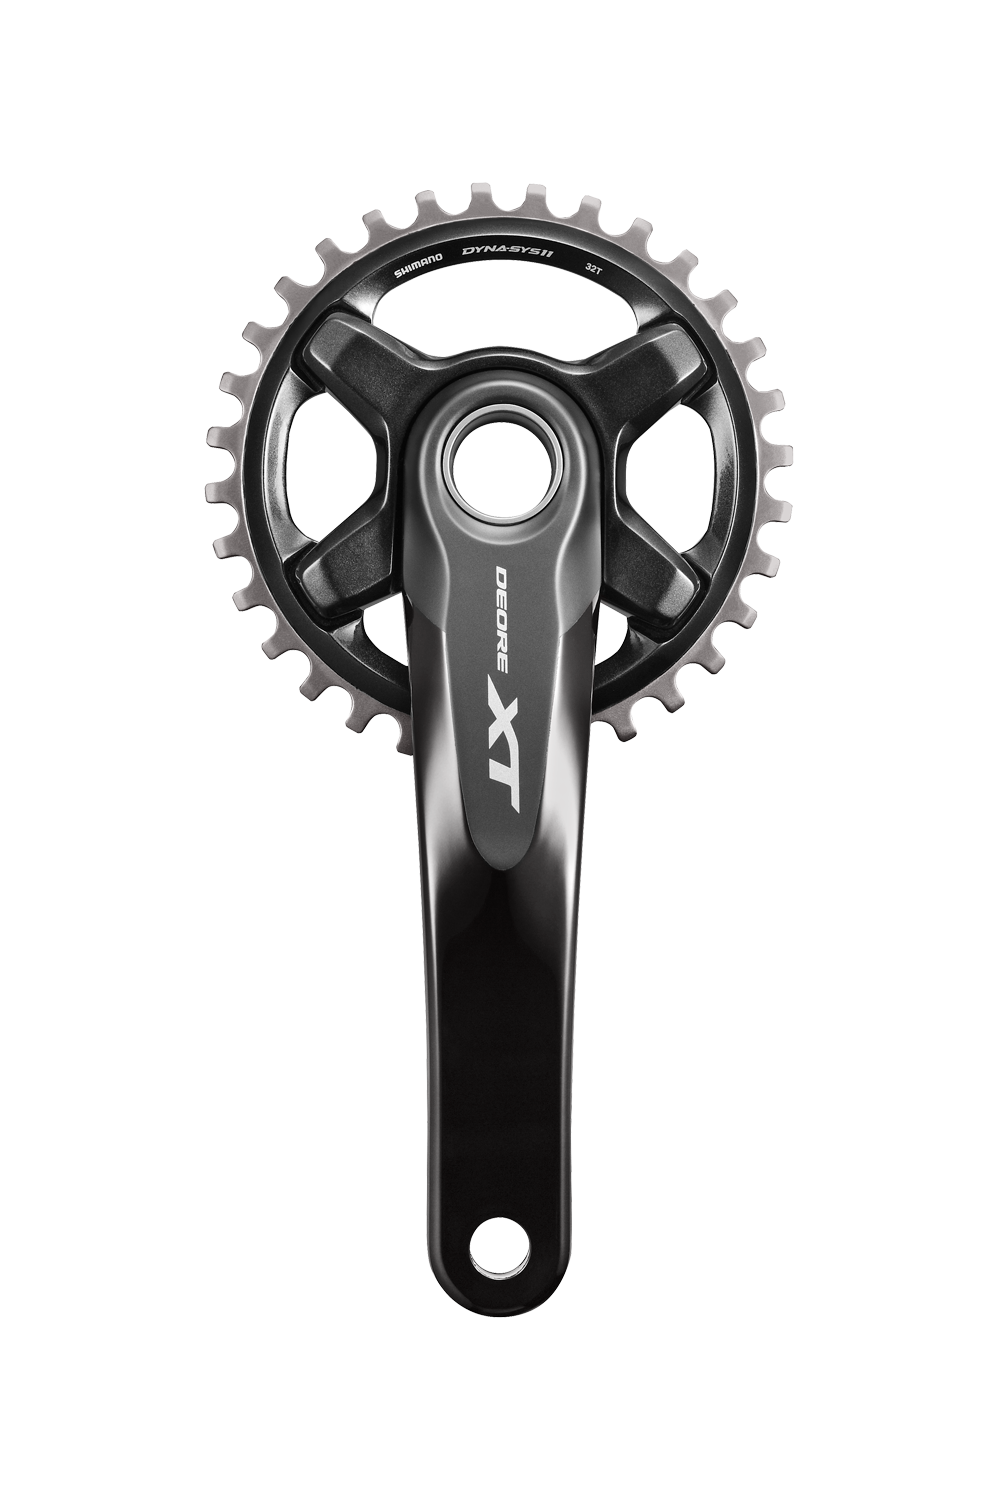 geleidelijk systeem Visa Shimano updates Deore XT group, offering its version of Boost and 1x11 |  Bicycle Retailer and Industry News